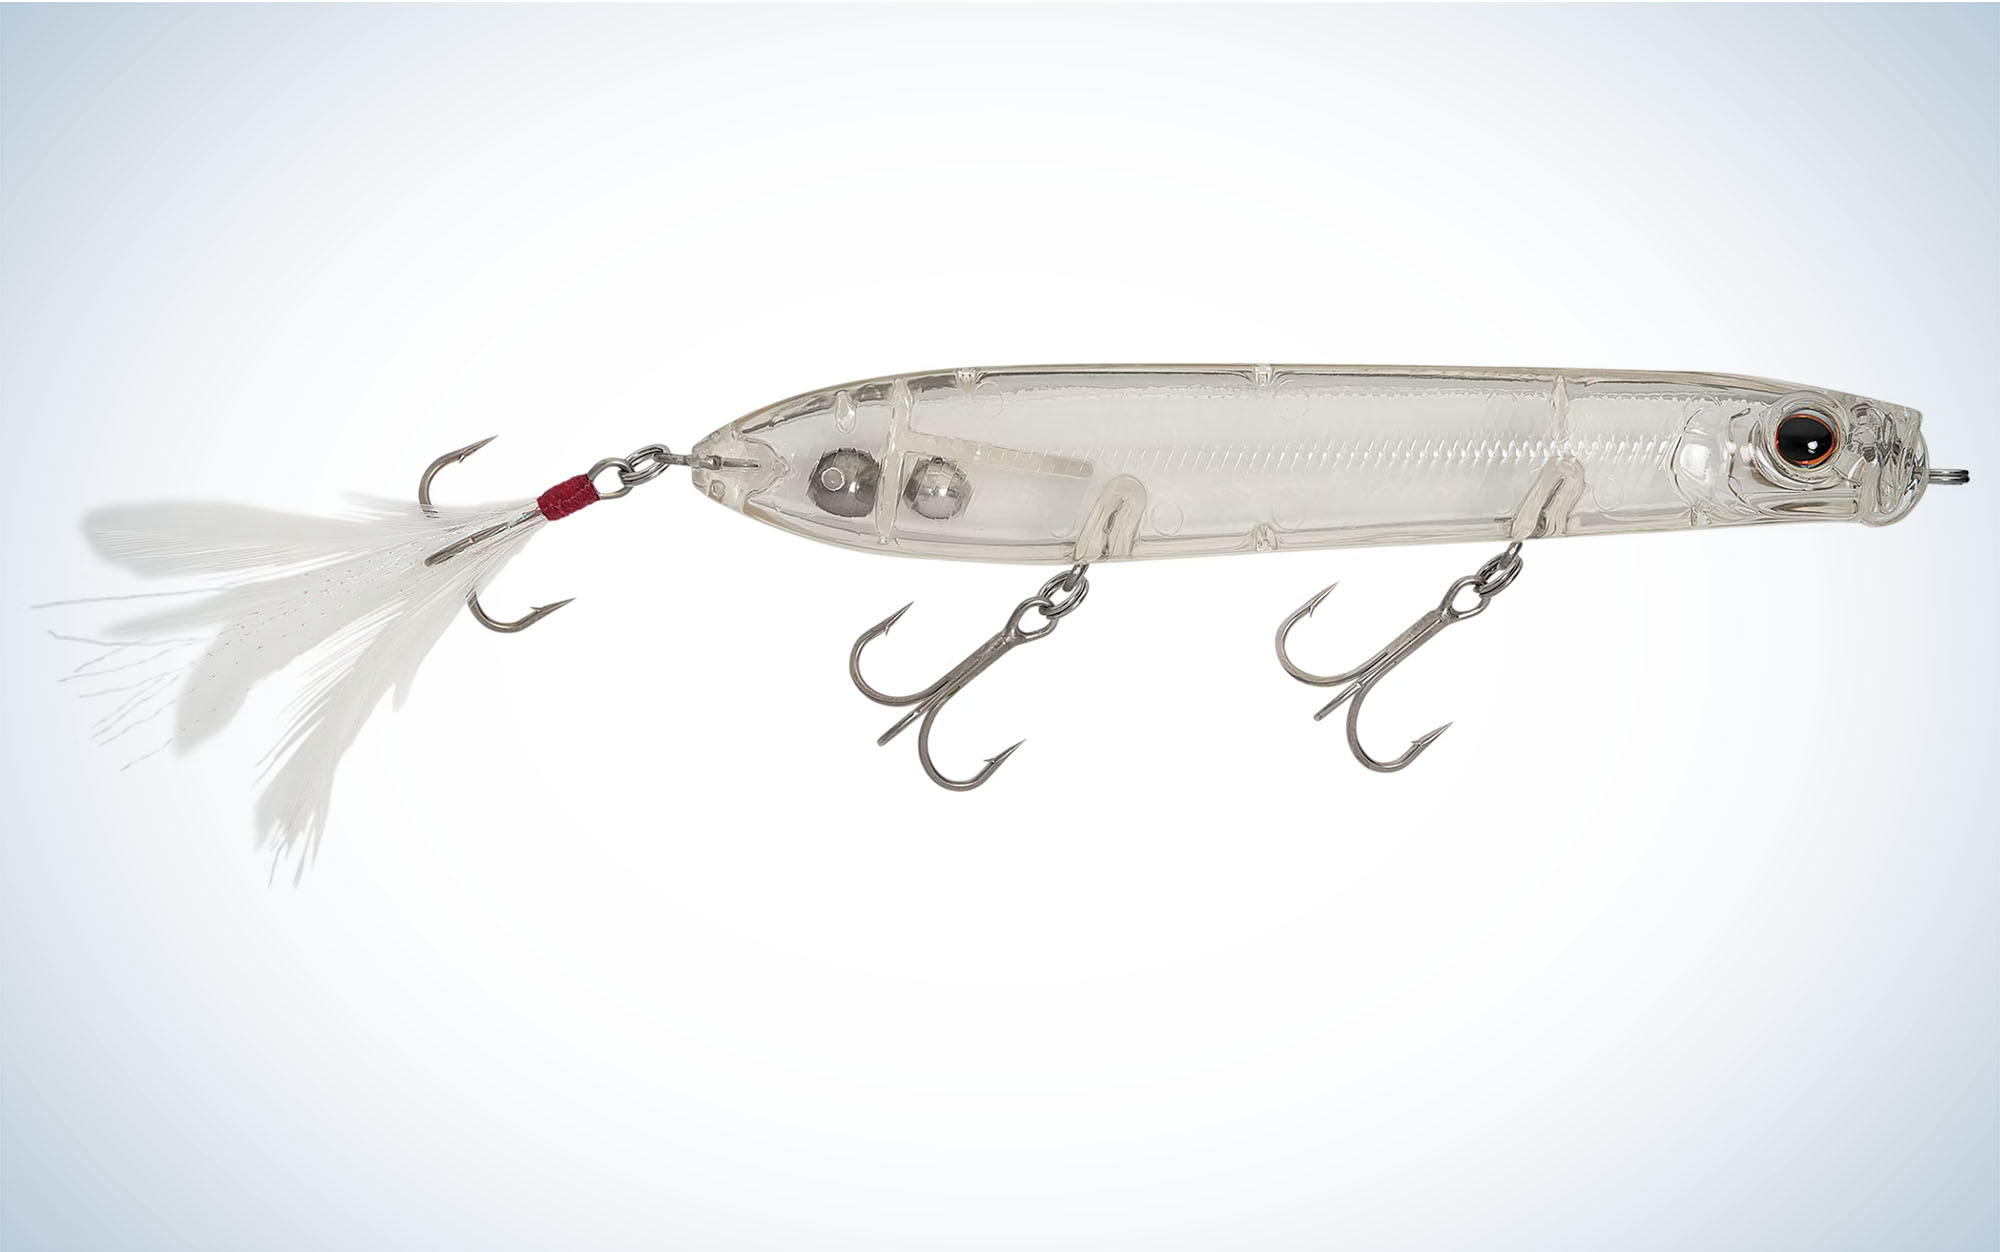  Top Water Bass Lures